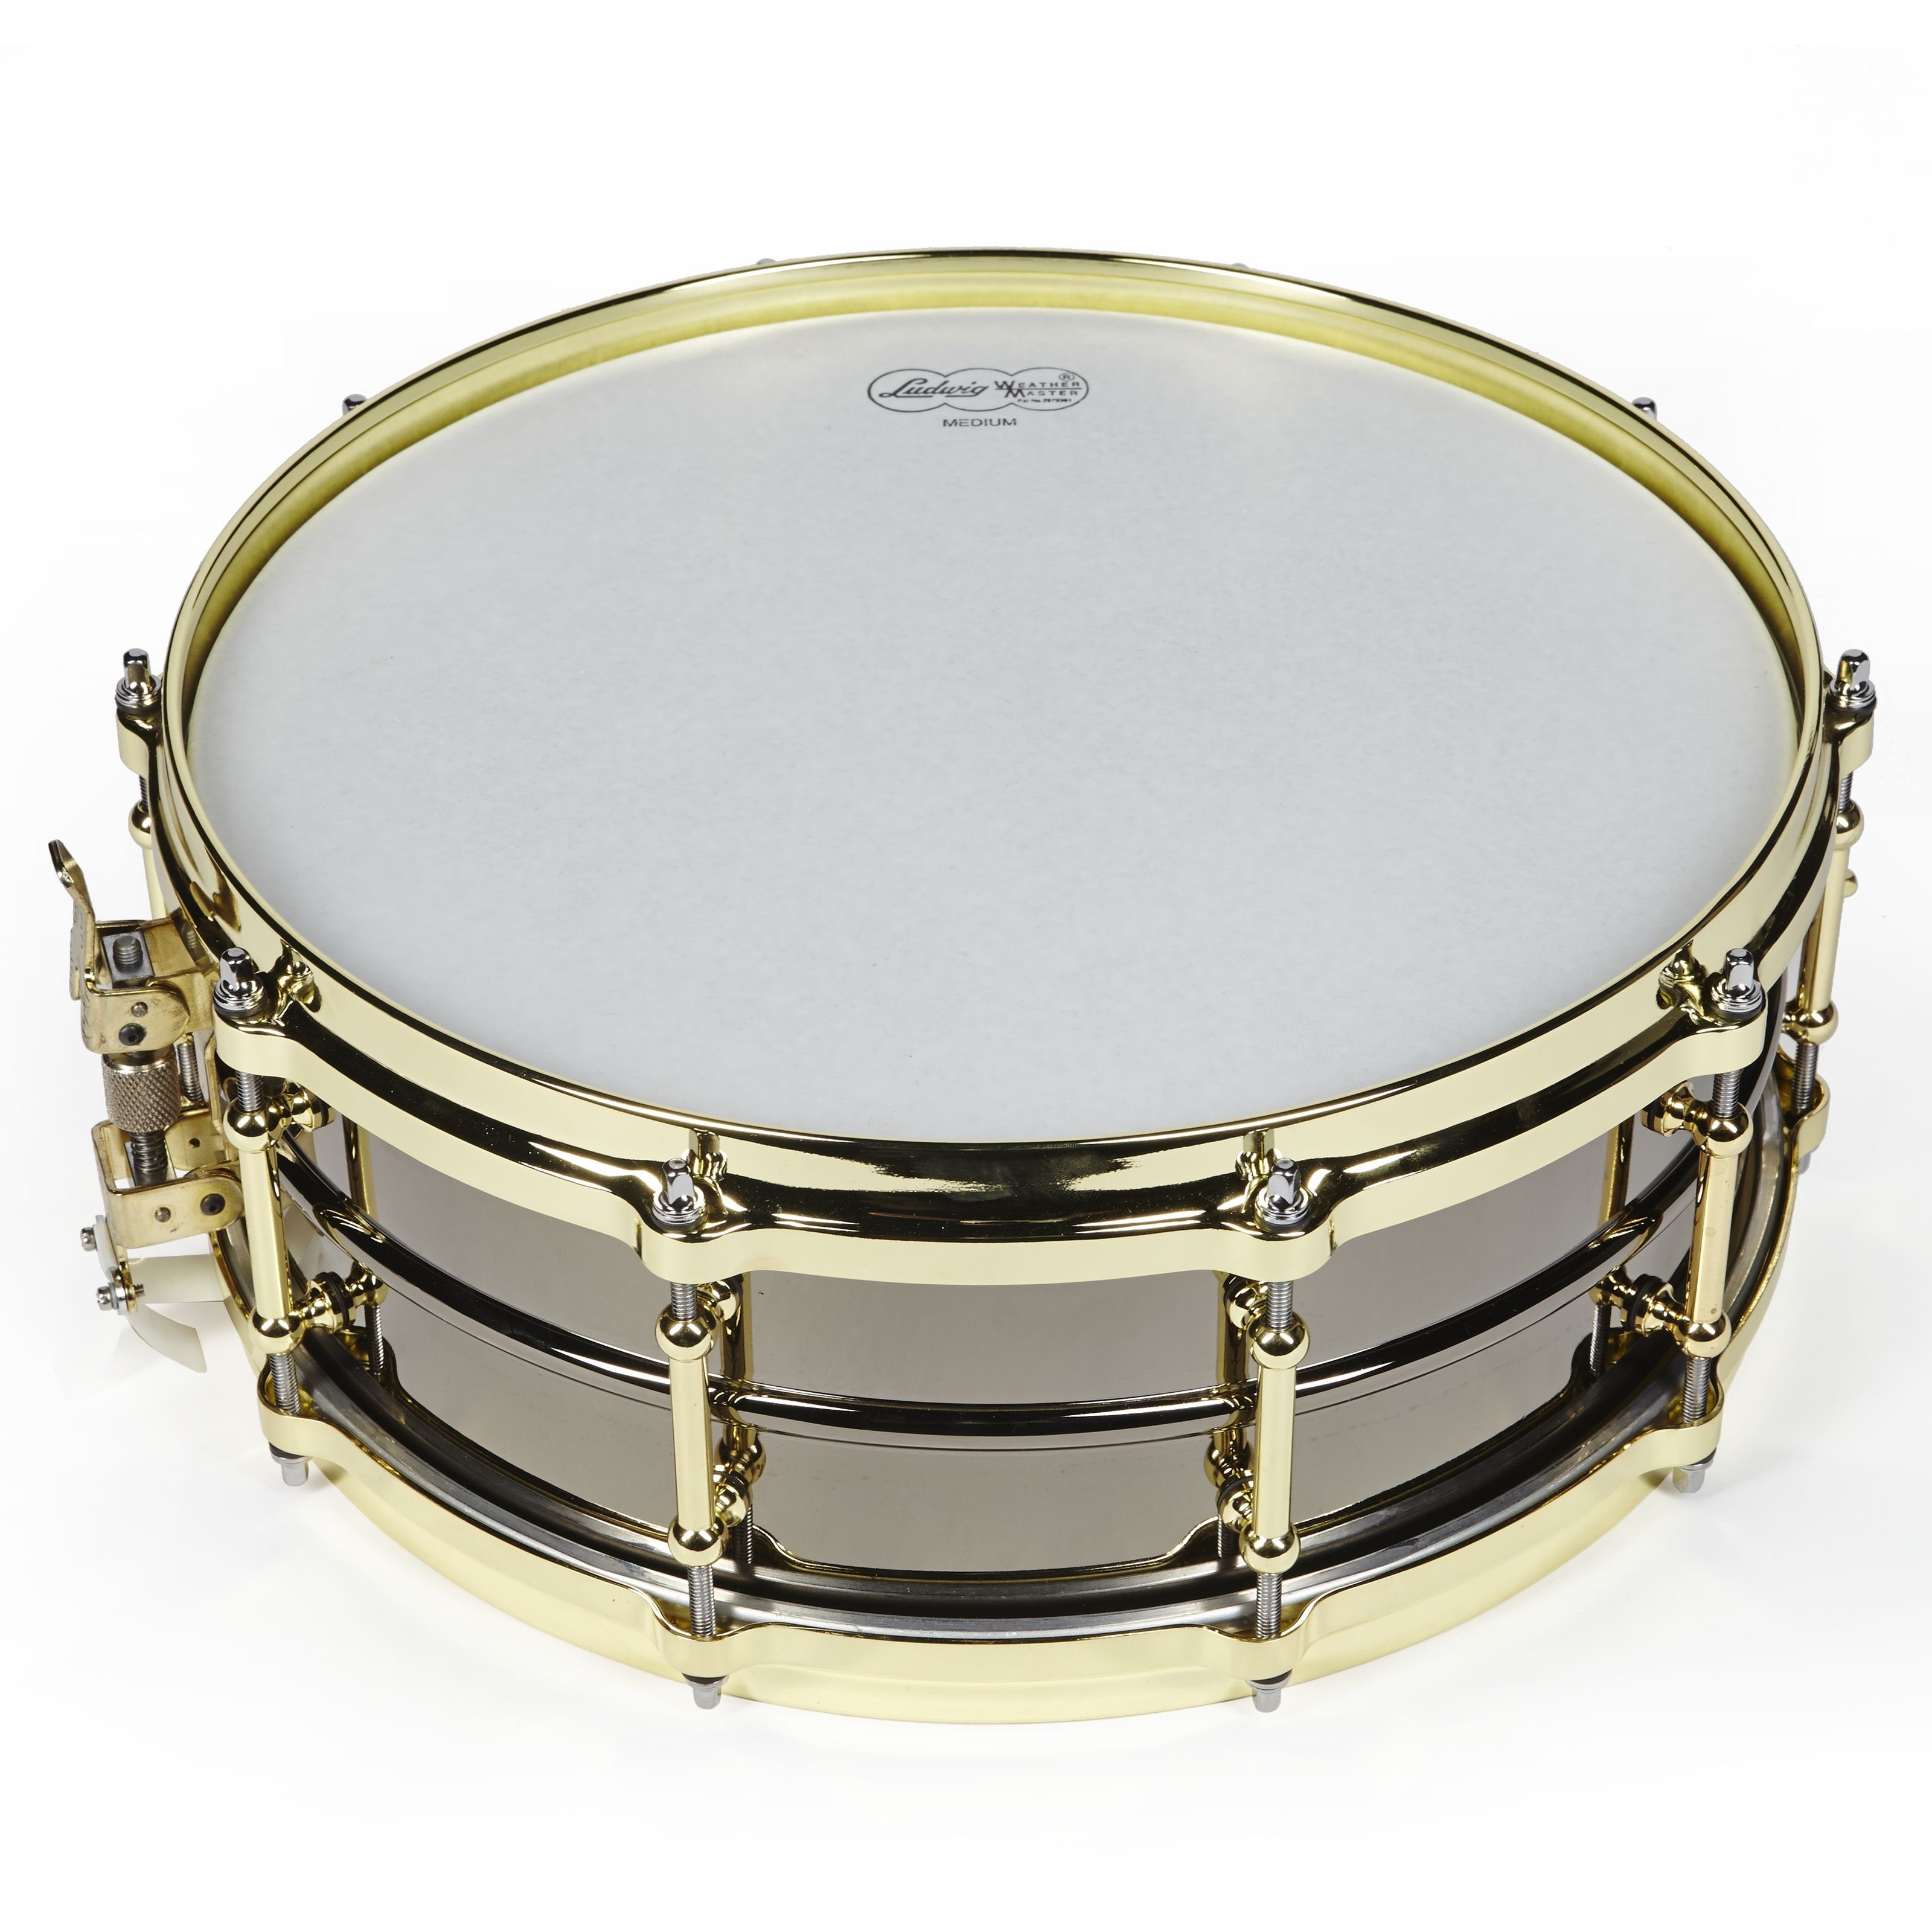 Ludwig Snare Drum,Black Beauty Snare LB416BT 14"x5", Brass Tube Lugs P86, Schlagzeuge, Snare Drums, Black Beauty Snare LB416BT 14"x5", Brass Tube Lugs P86 - Snare Drum